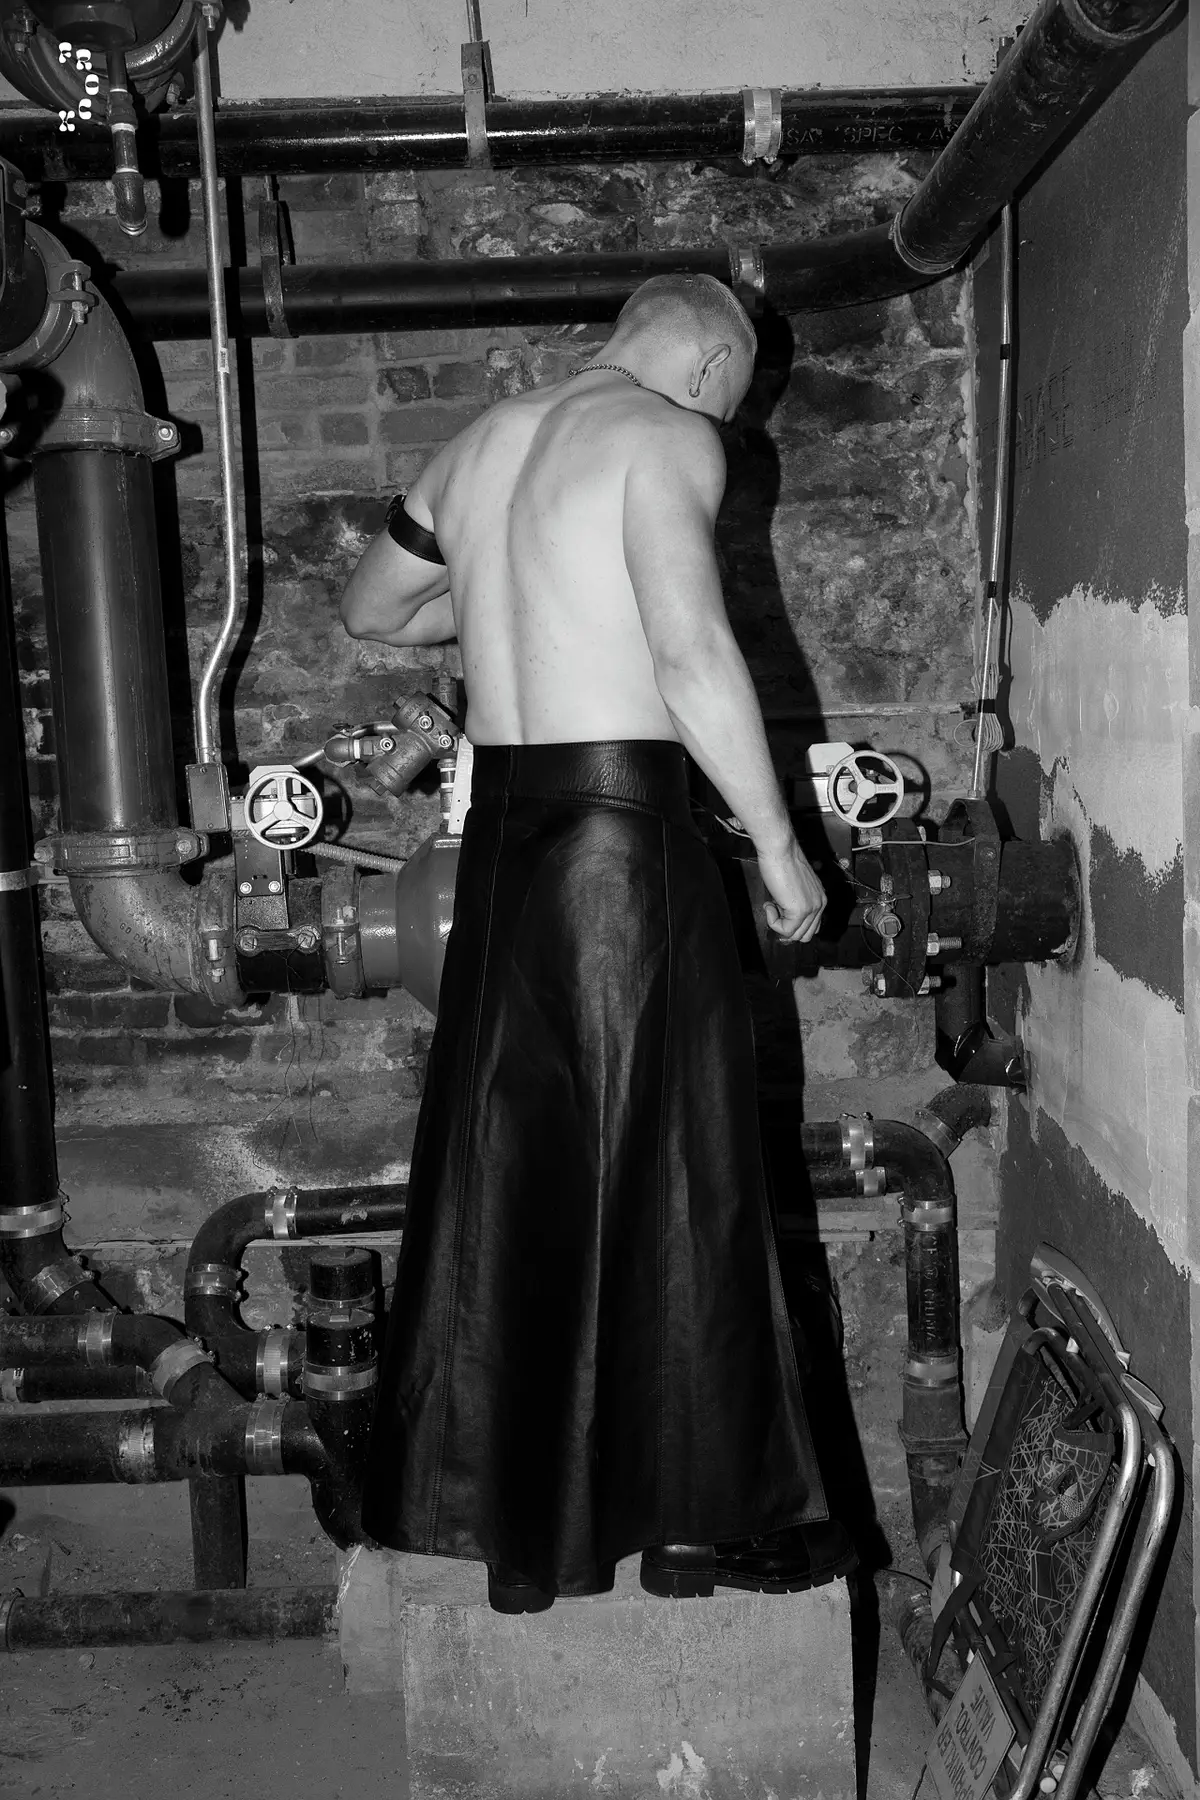 Meet Sir Leo Rush In The Leather Dungeon